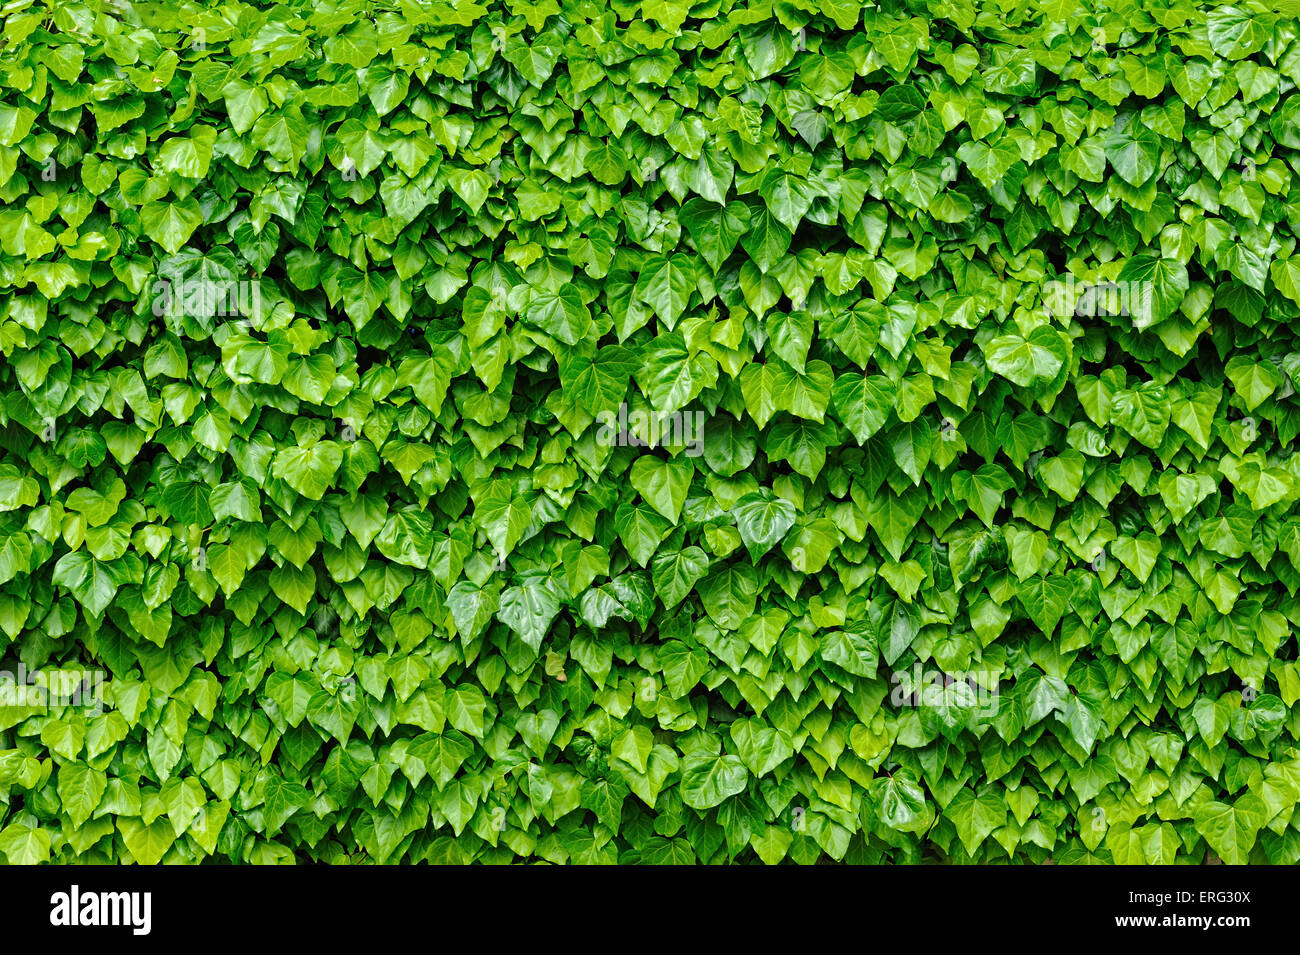 Green ivy leaves background Stock Photo